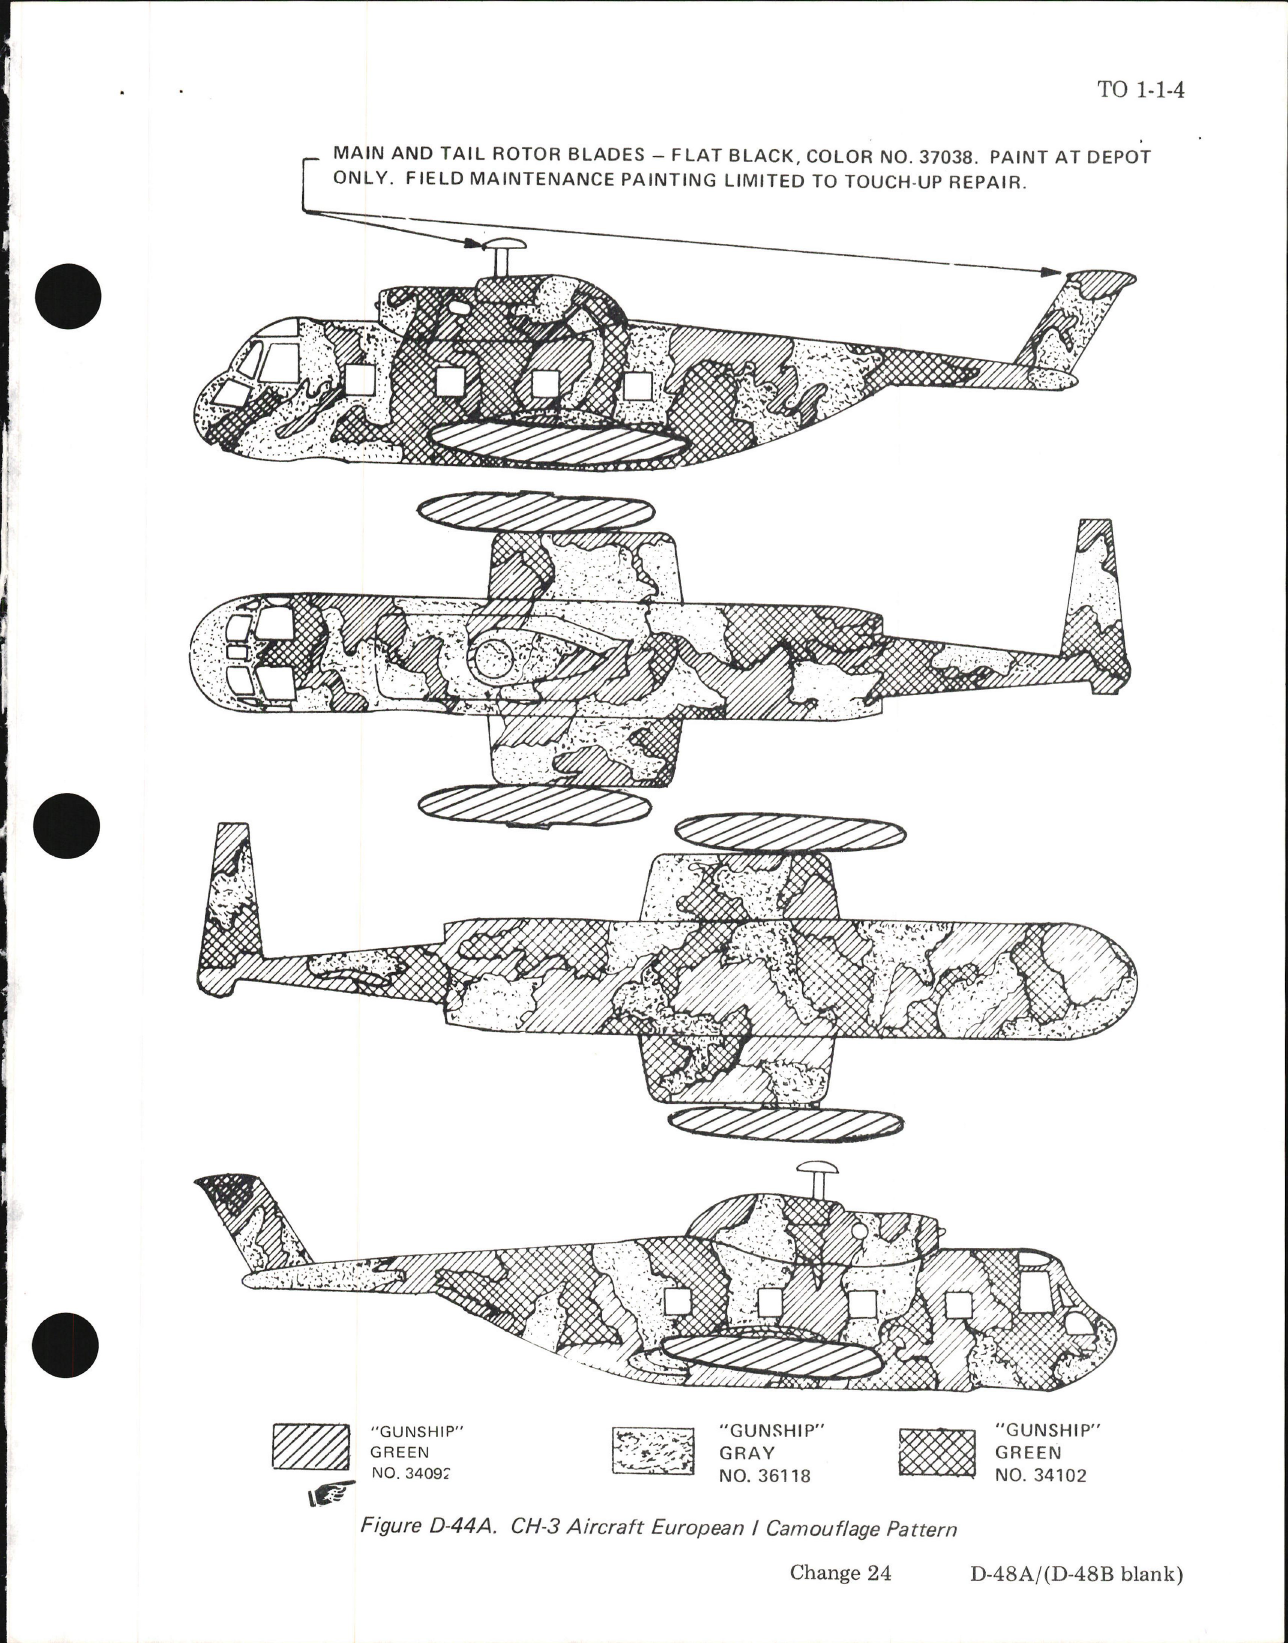 Sample page 5 from AirCorps Library document: Exterior Finishes, Insignia and Markings for USAF Aircraft - Change - 24